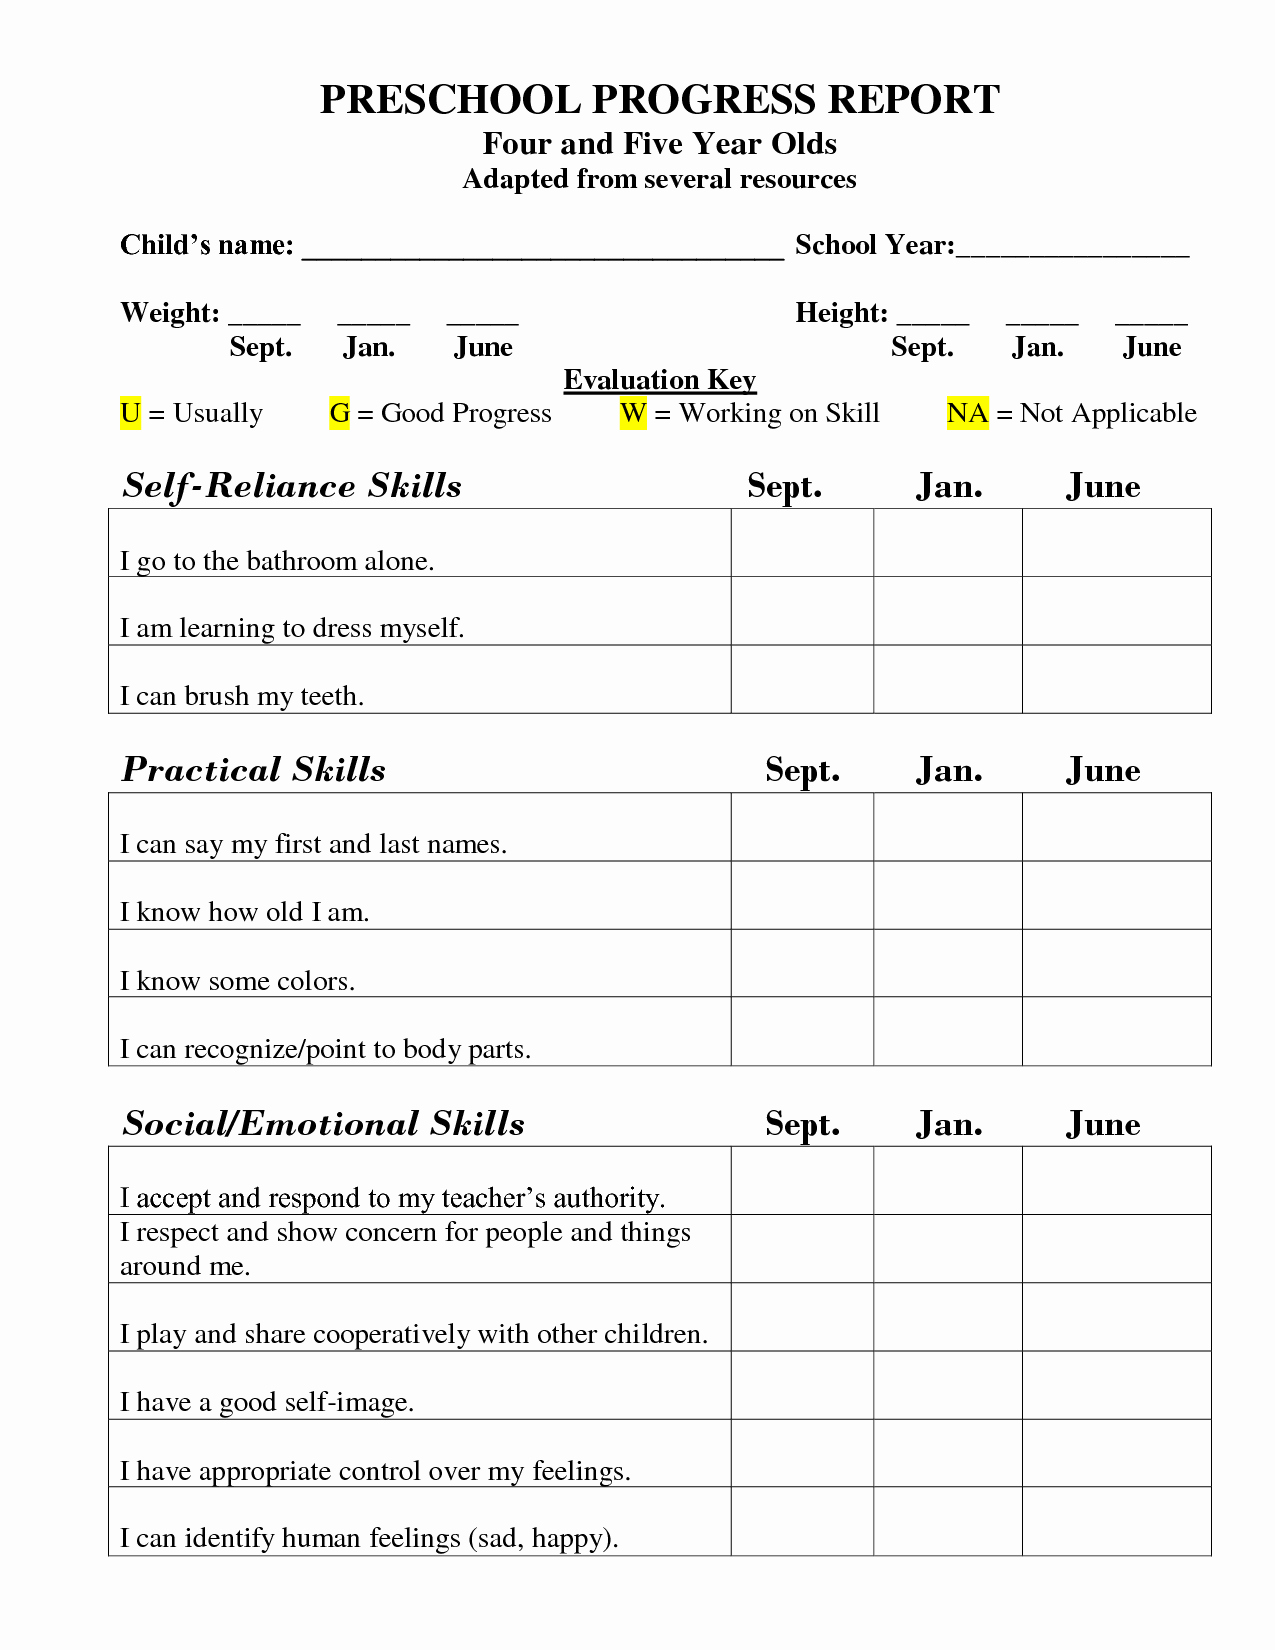 Kindergarten Progress Report Template Awesome Nursery Daily forms